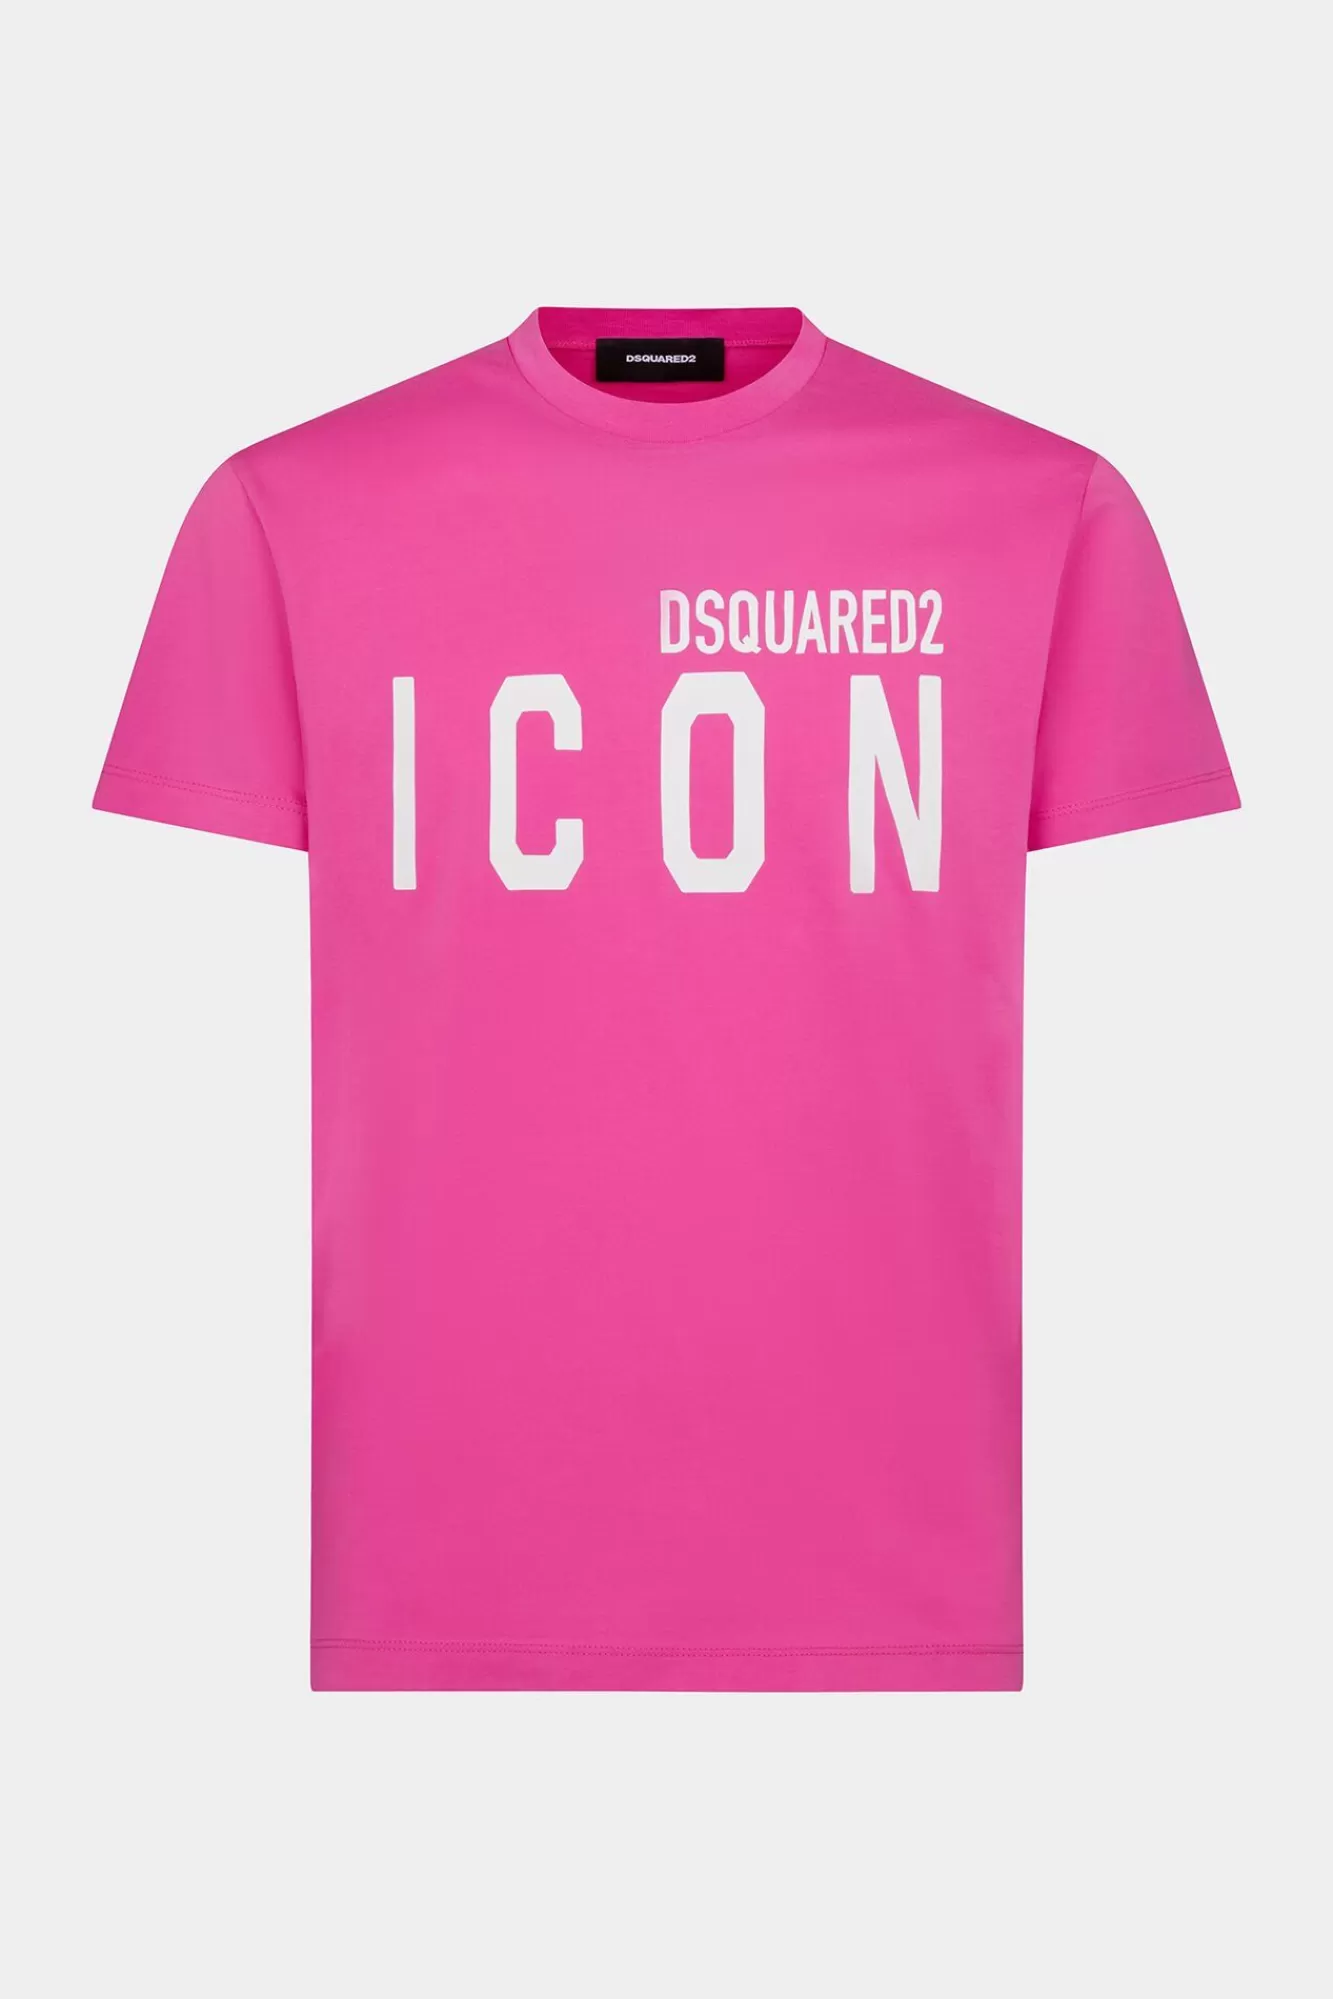 Be Icon Cool T-Shirt<Dsquared2 Fashion